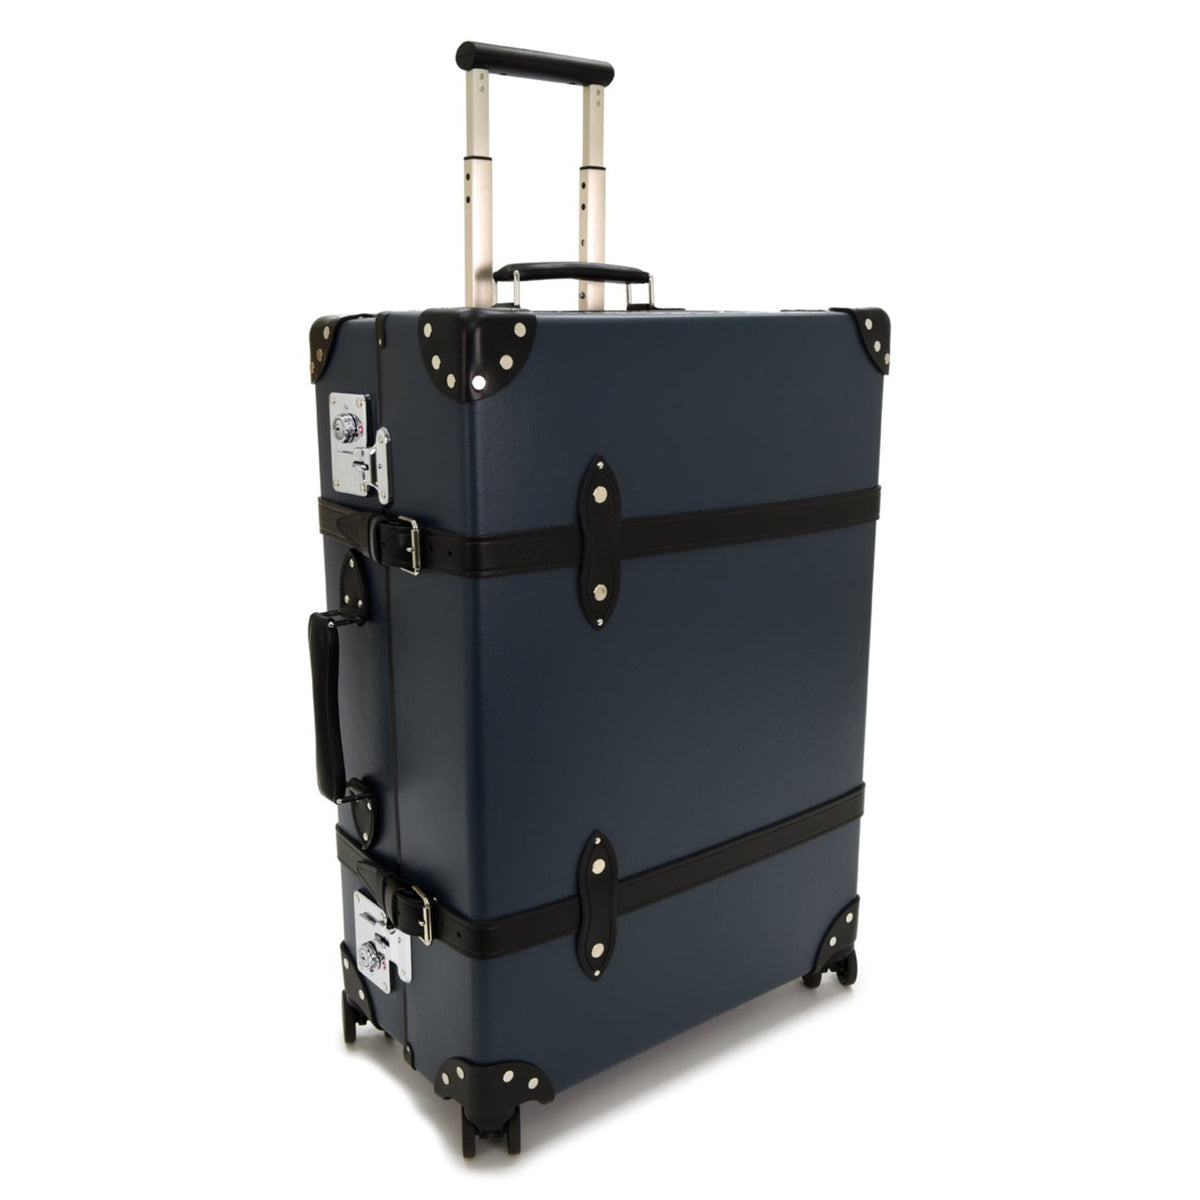 James Bond Check-In Trolley Case - Dr. No Edition - By Globe-Trotter